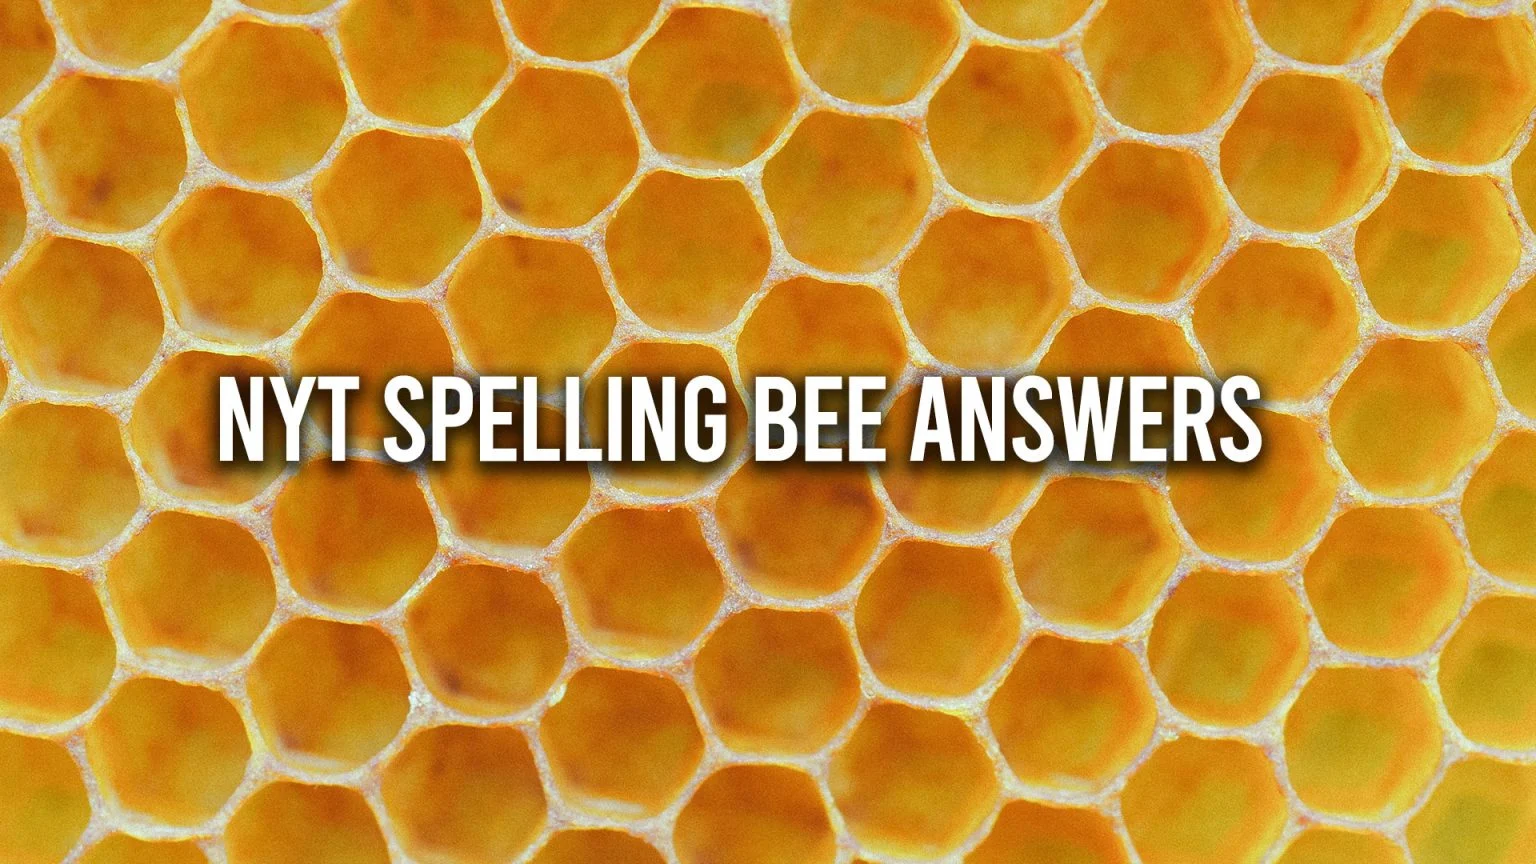 nyt spelling bee forum answers today